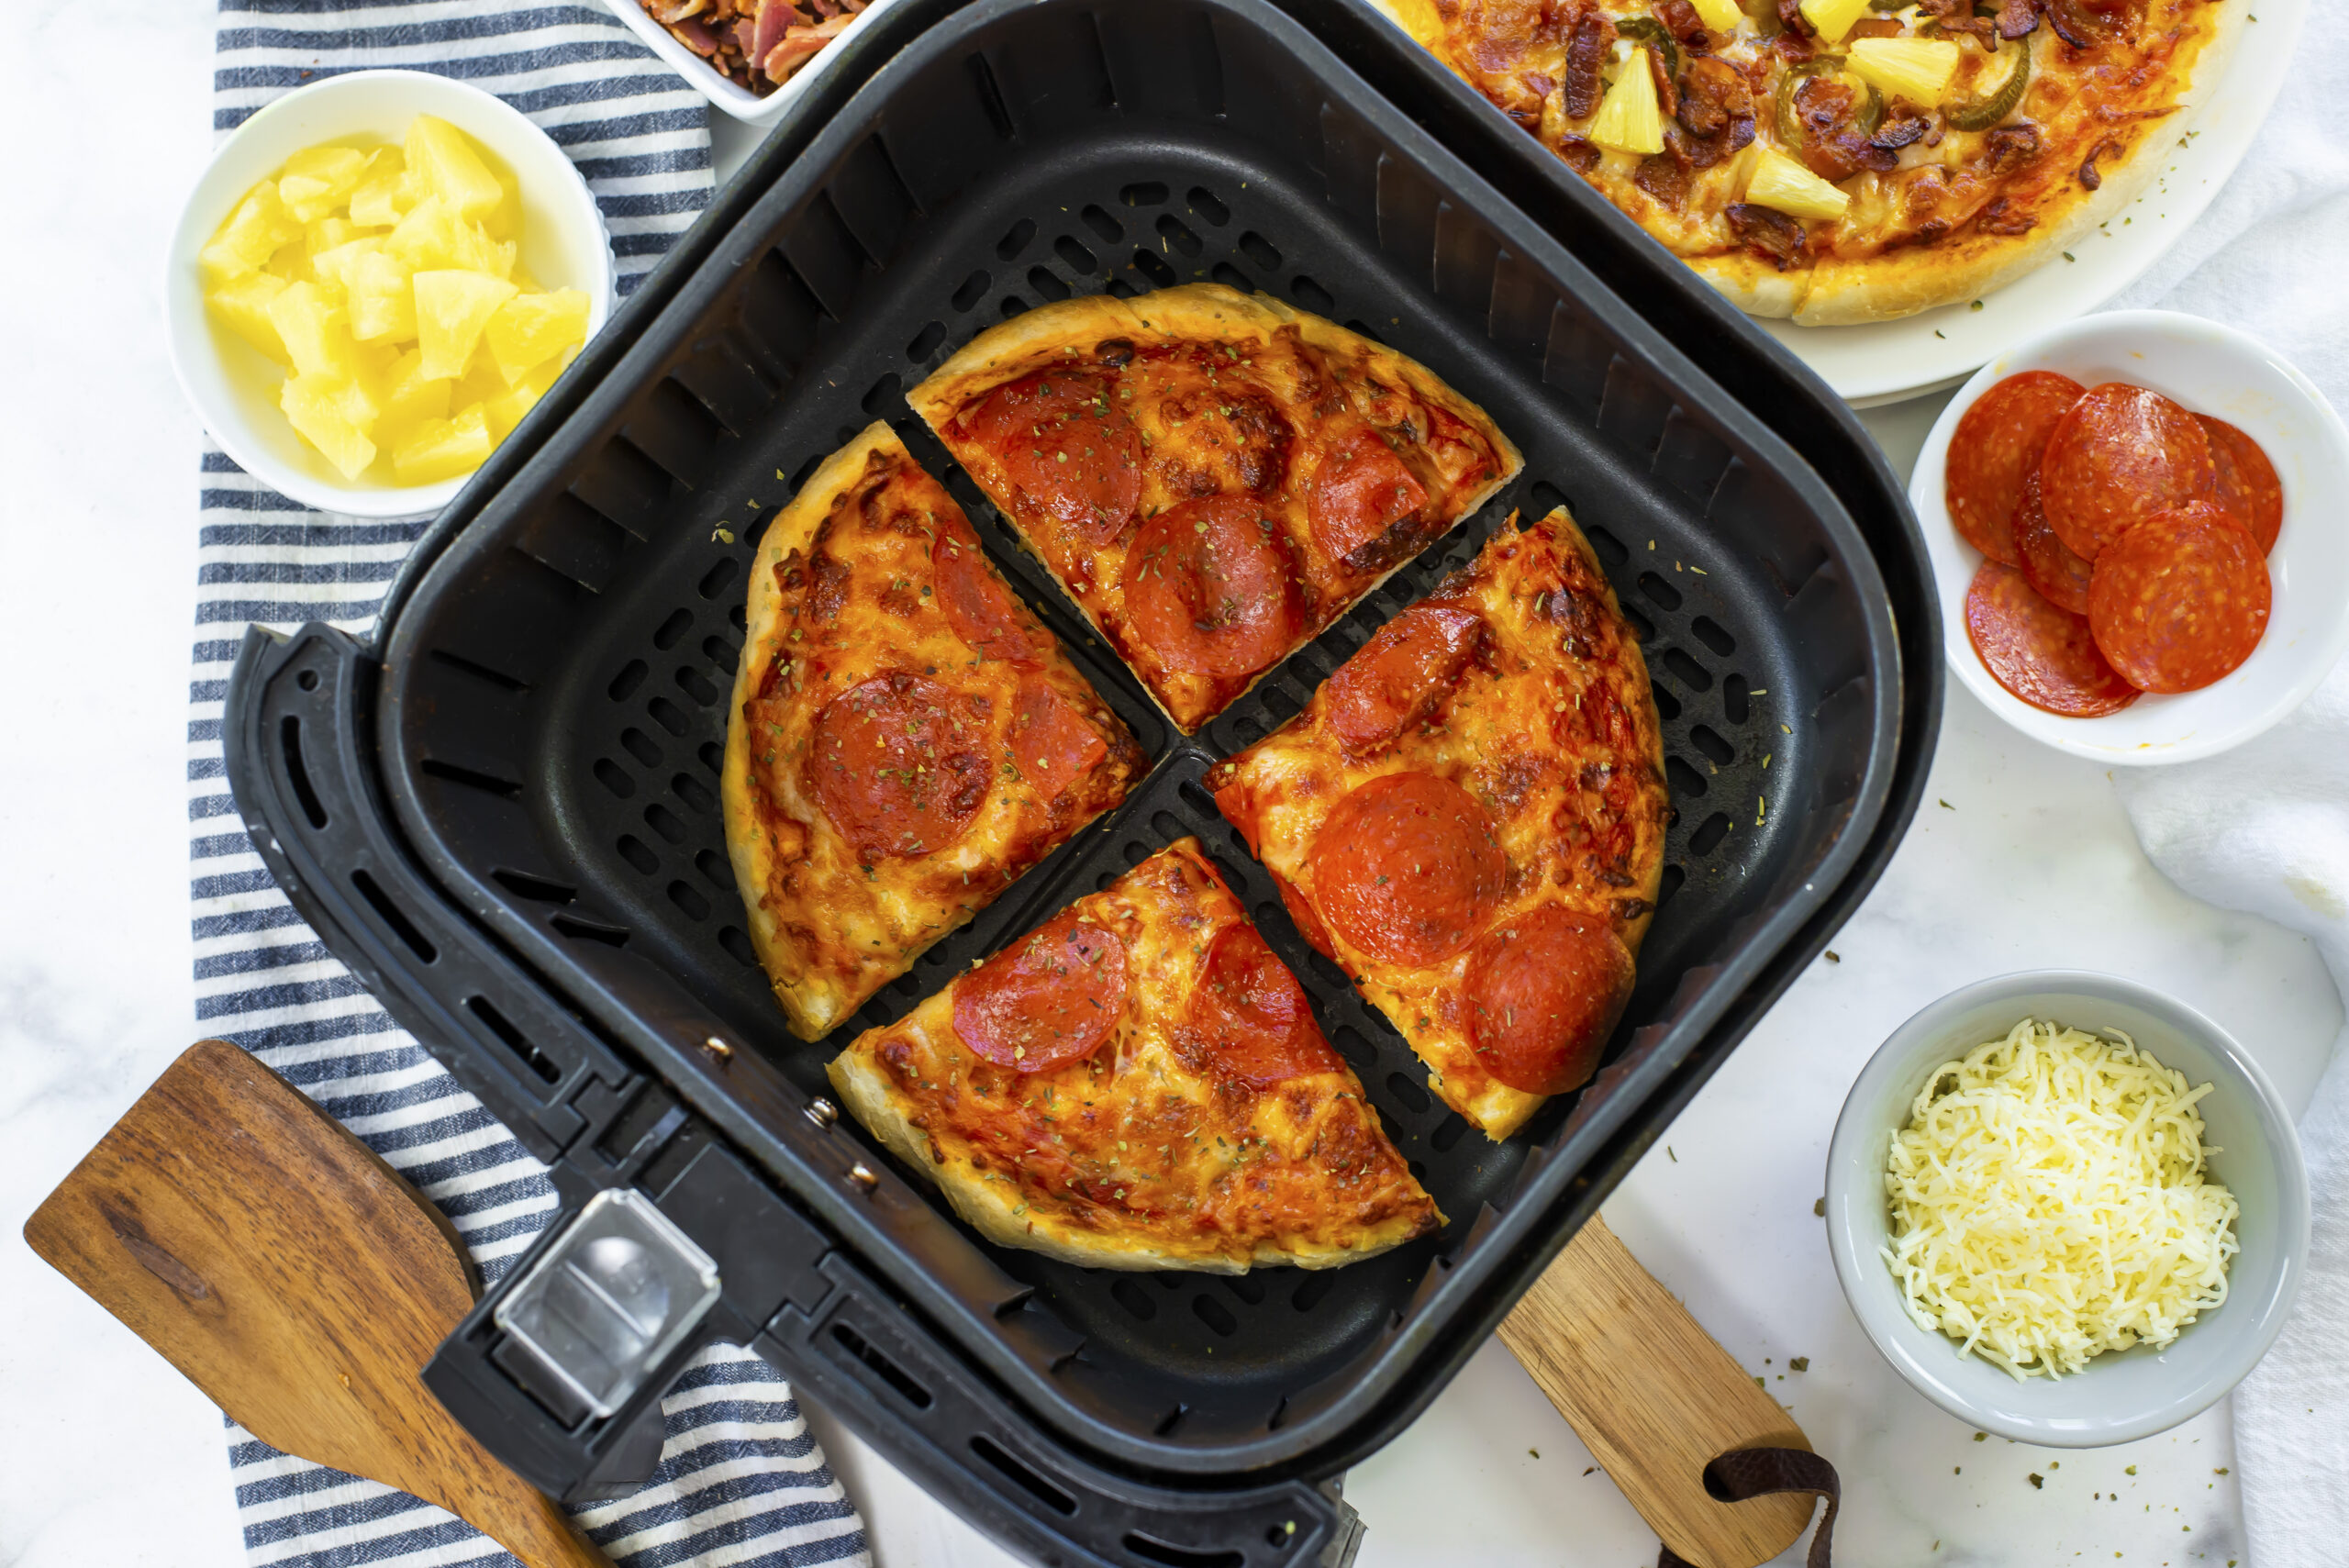 Sliced pizza in an air fryer basket.